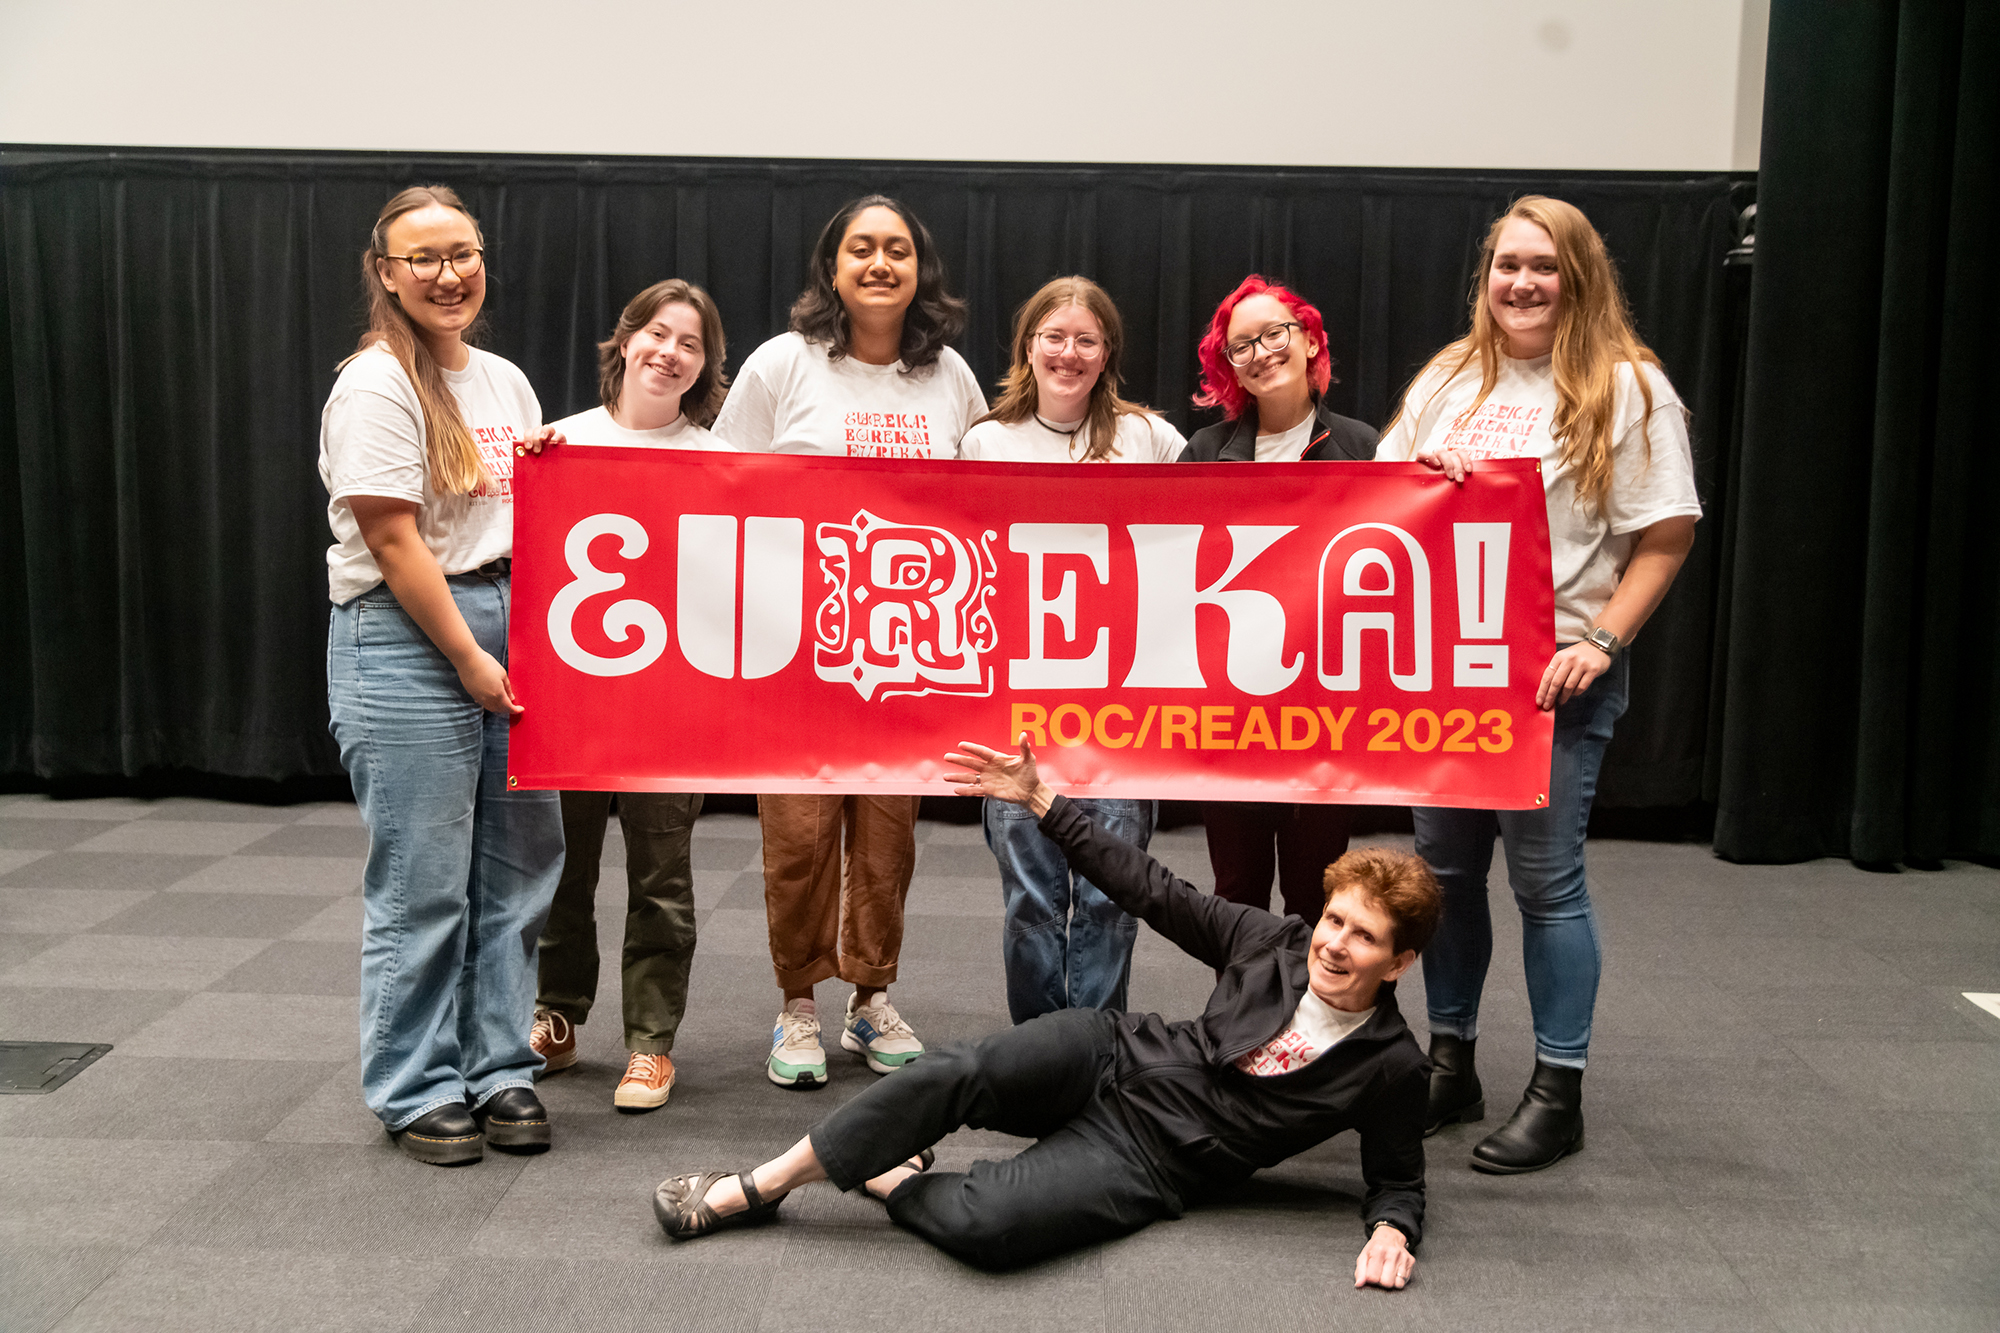 A group of students and faculty hold up a EUREKA! 2023 banner.